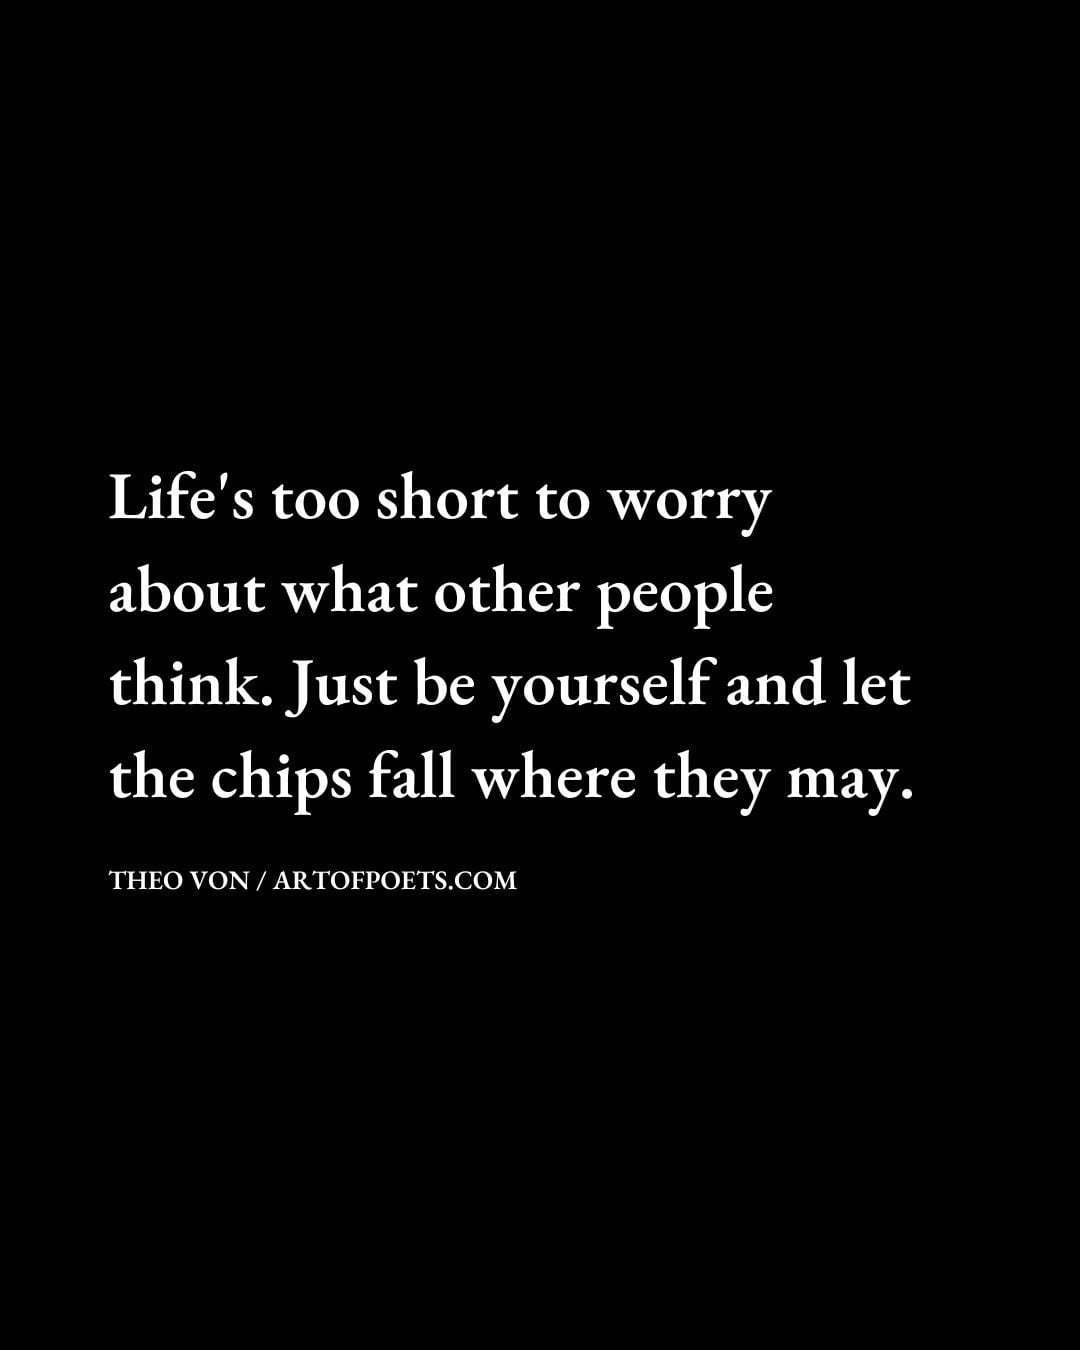 Lifes too short to worry about what other people think. Just be yourself and let the chips fall where they may